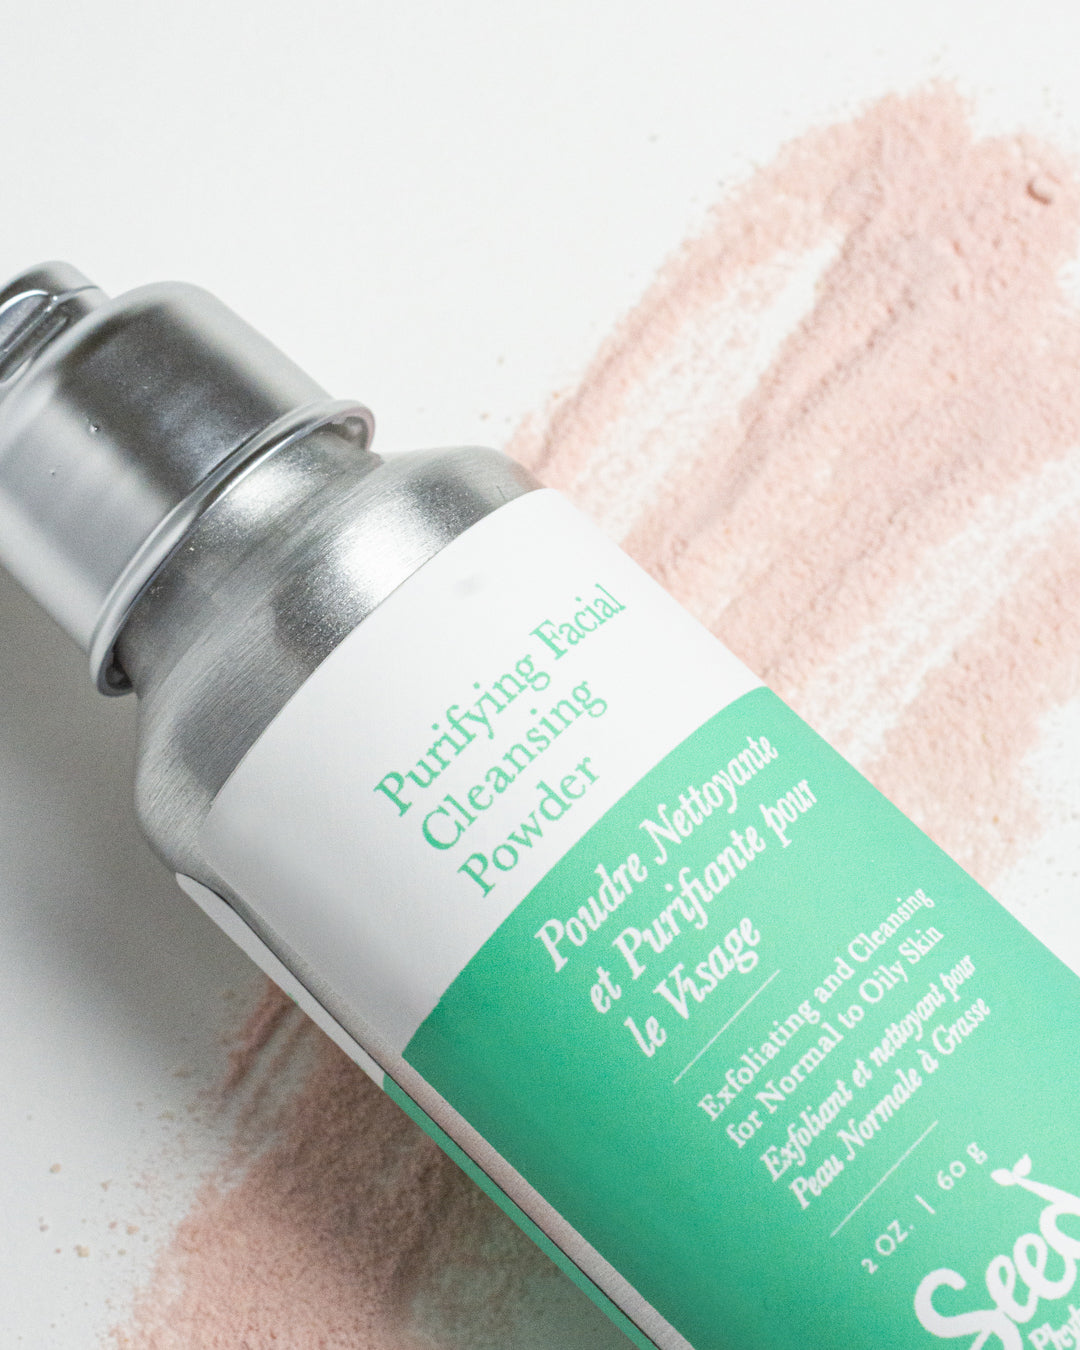 Seed Phytonutrients Purifying Facial Cleansing Powder